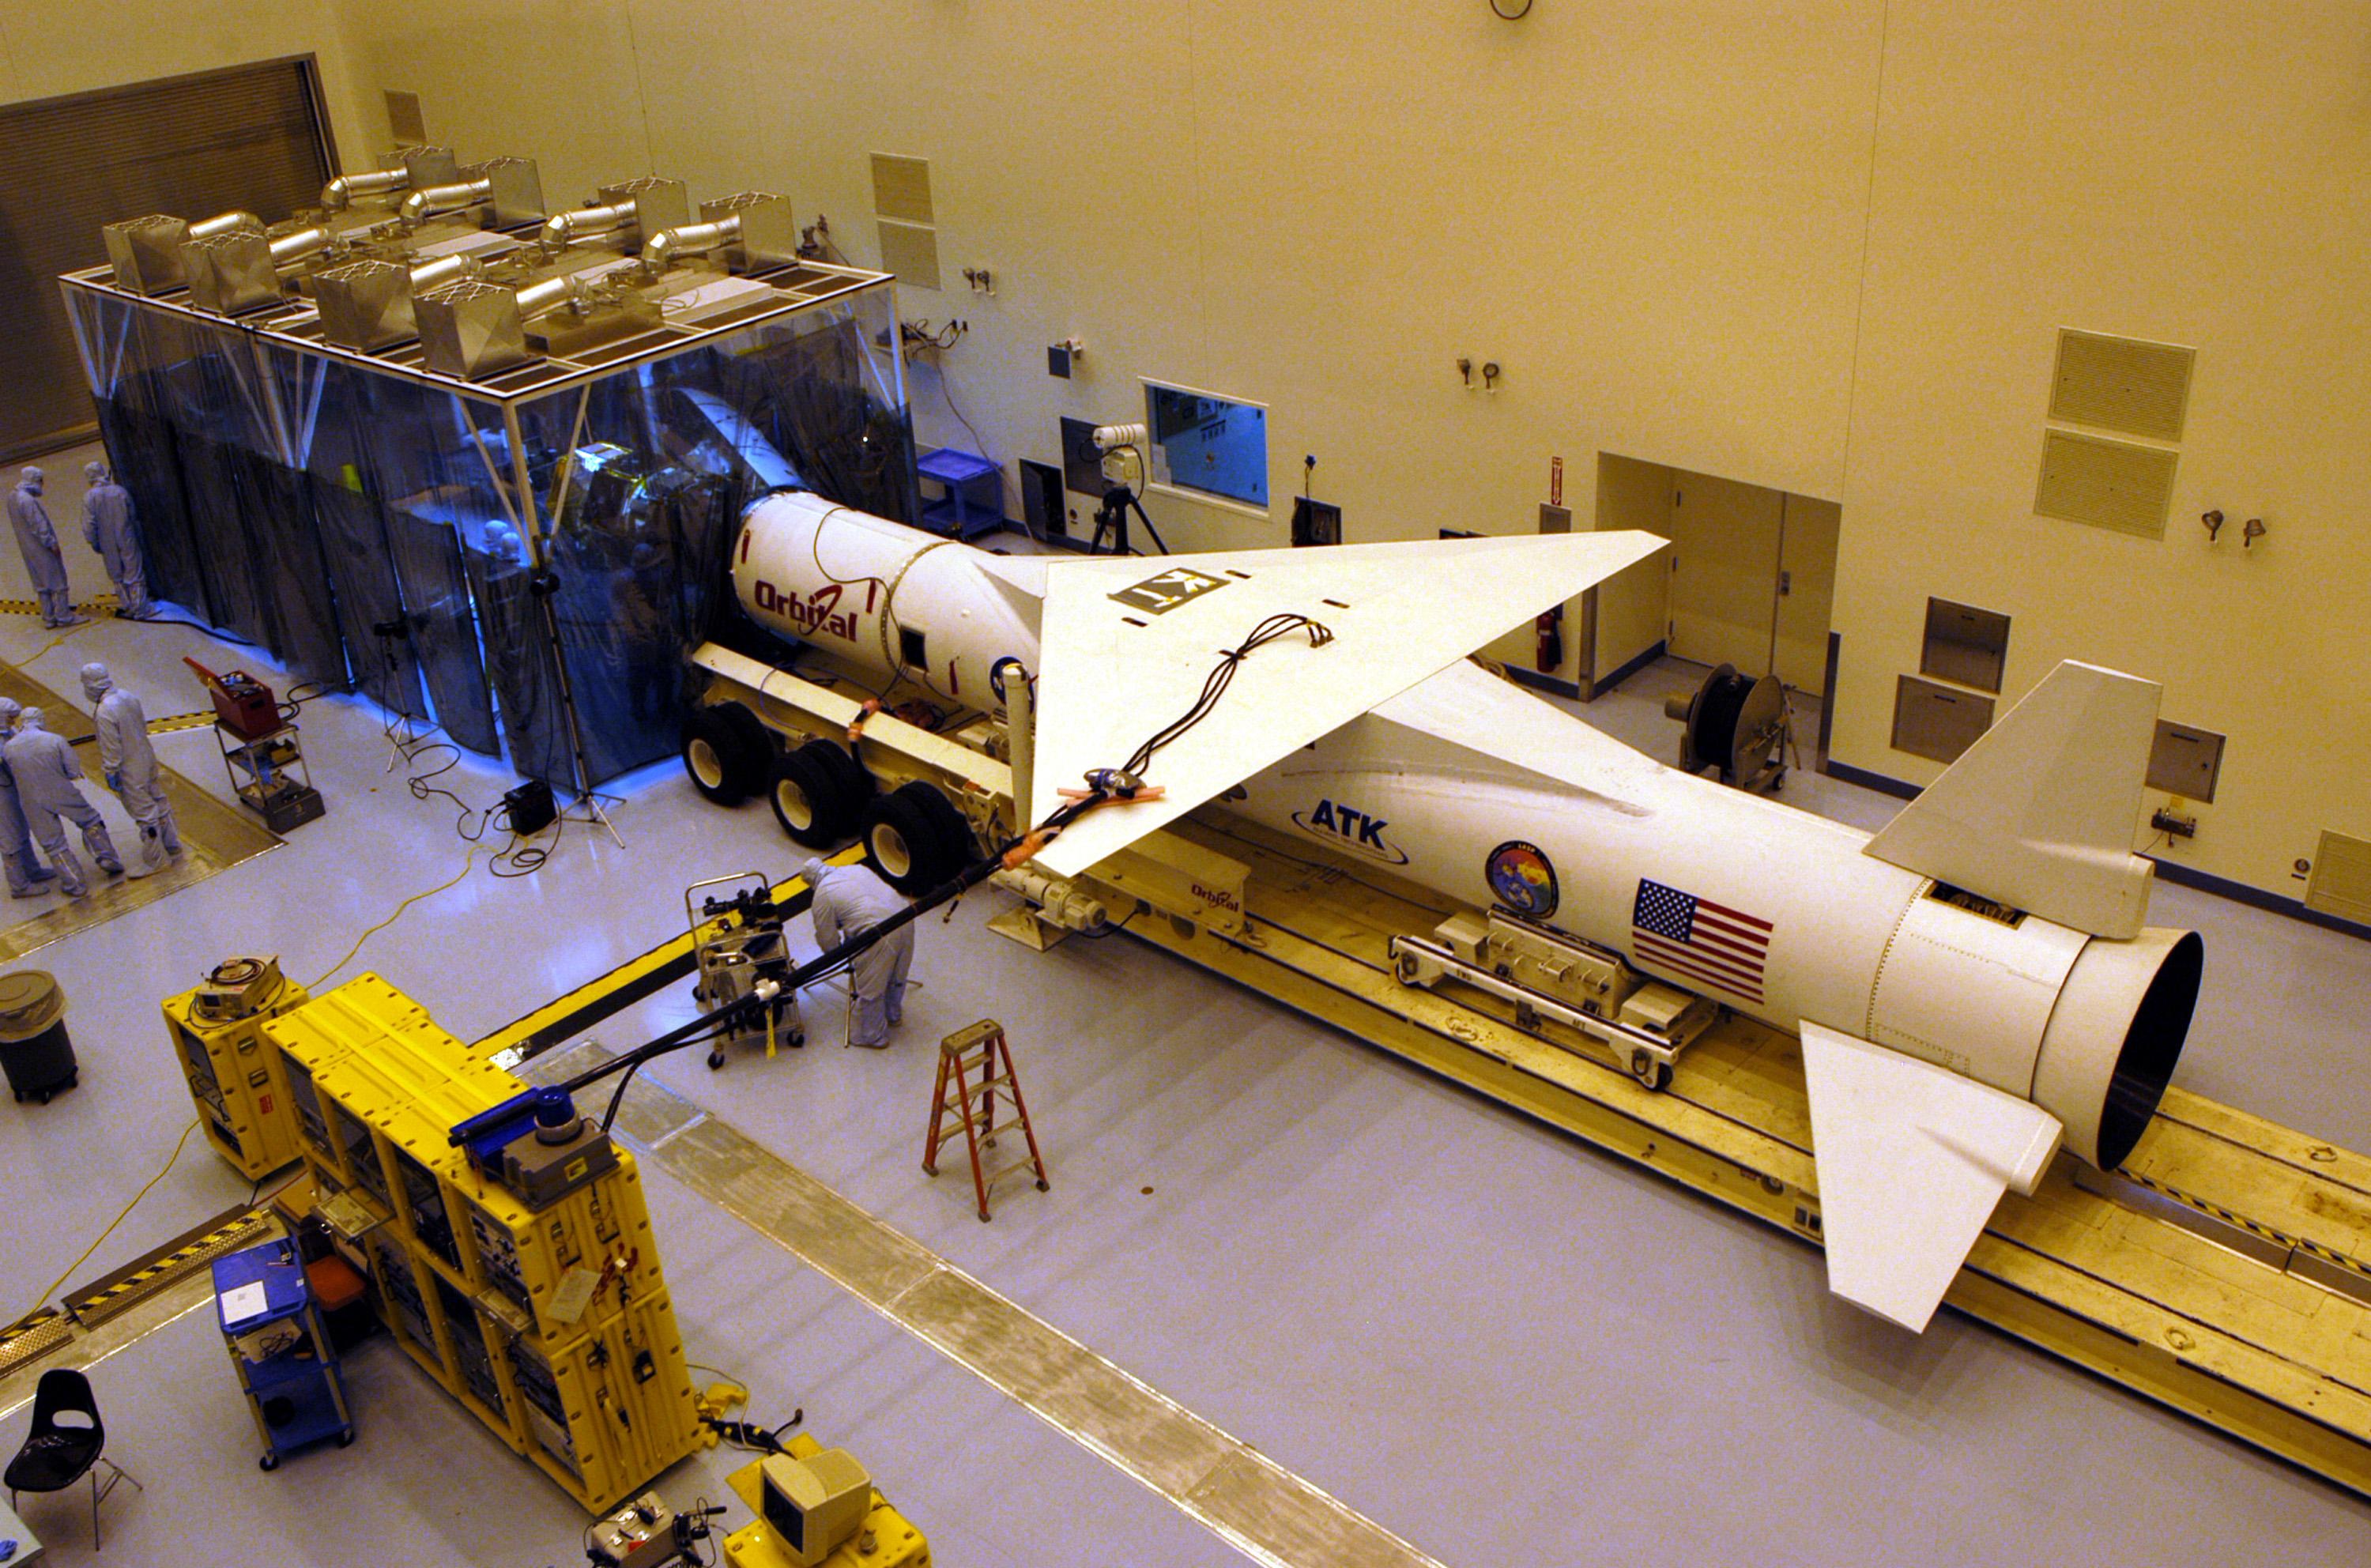 Pegasus XL rocket in MPPF with clean room